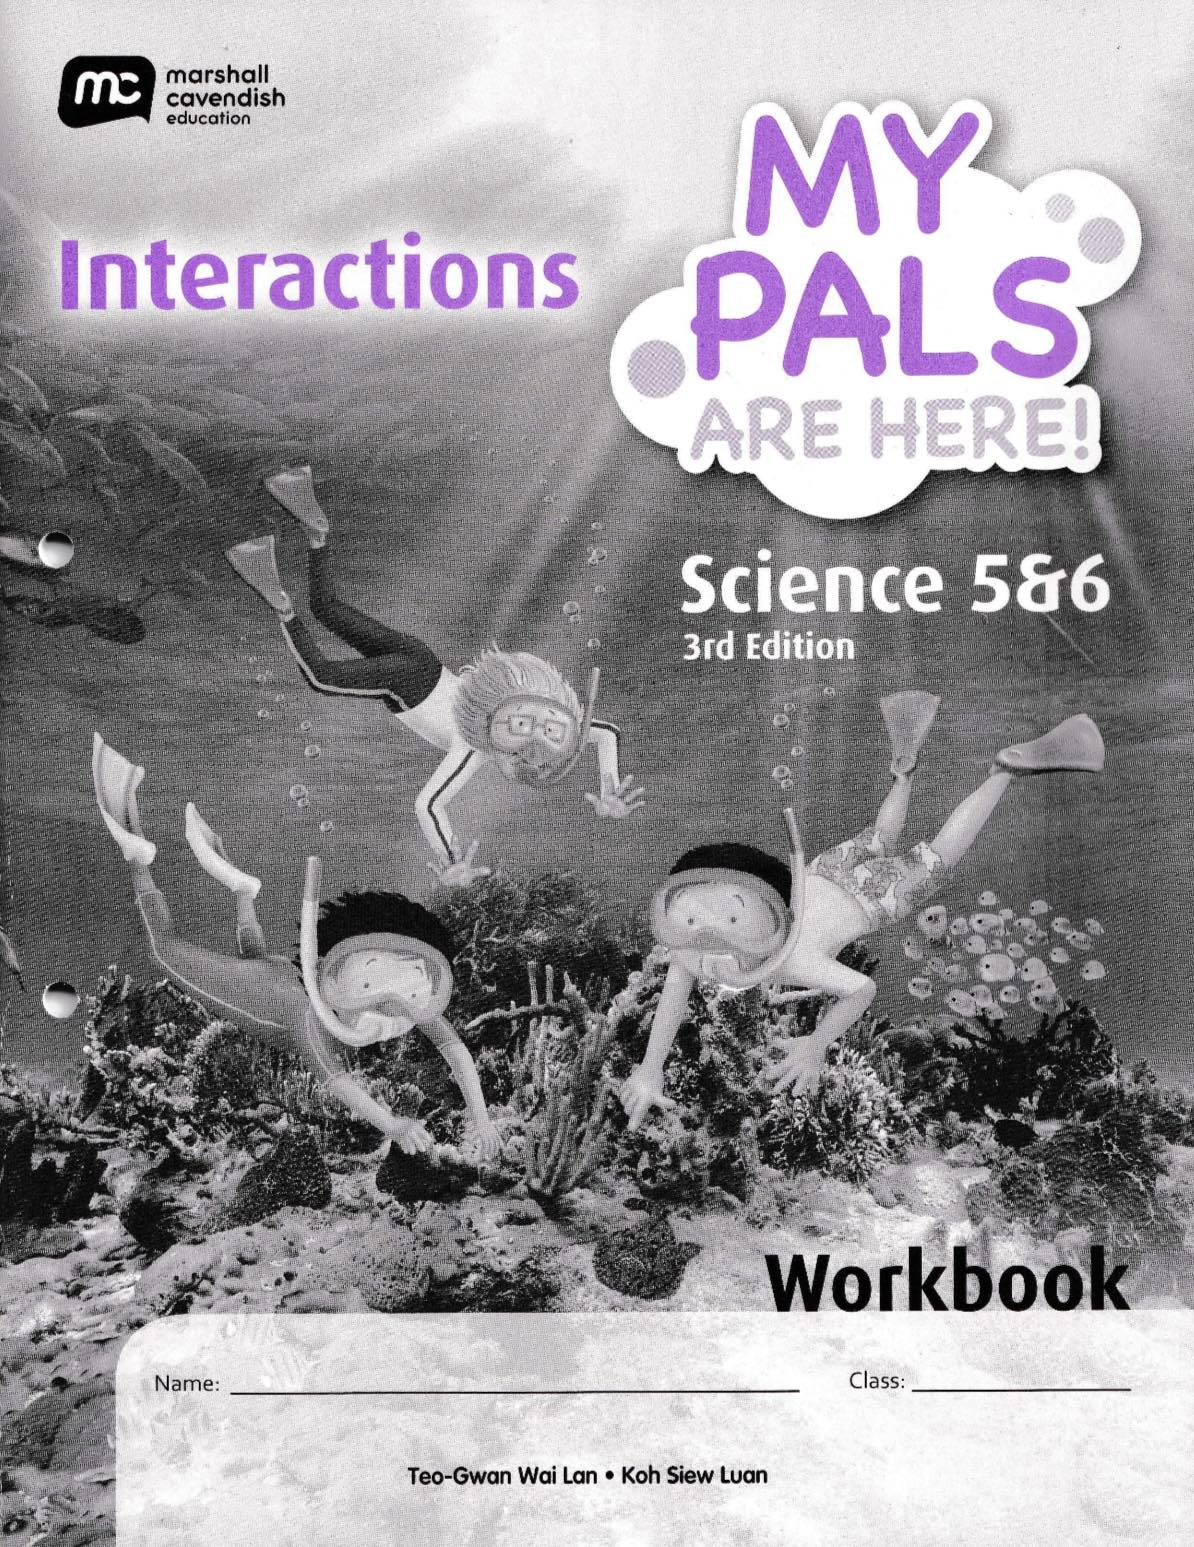 My Pals Are Here! Science Primary 5&6 Workbook (3rd Edition)